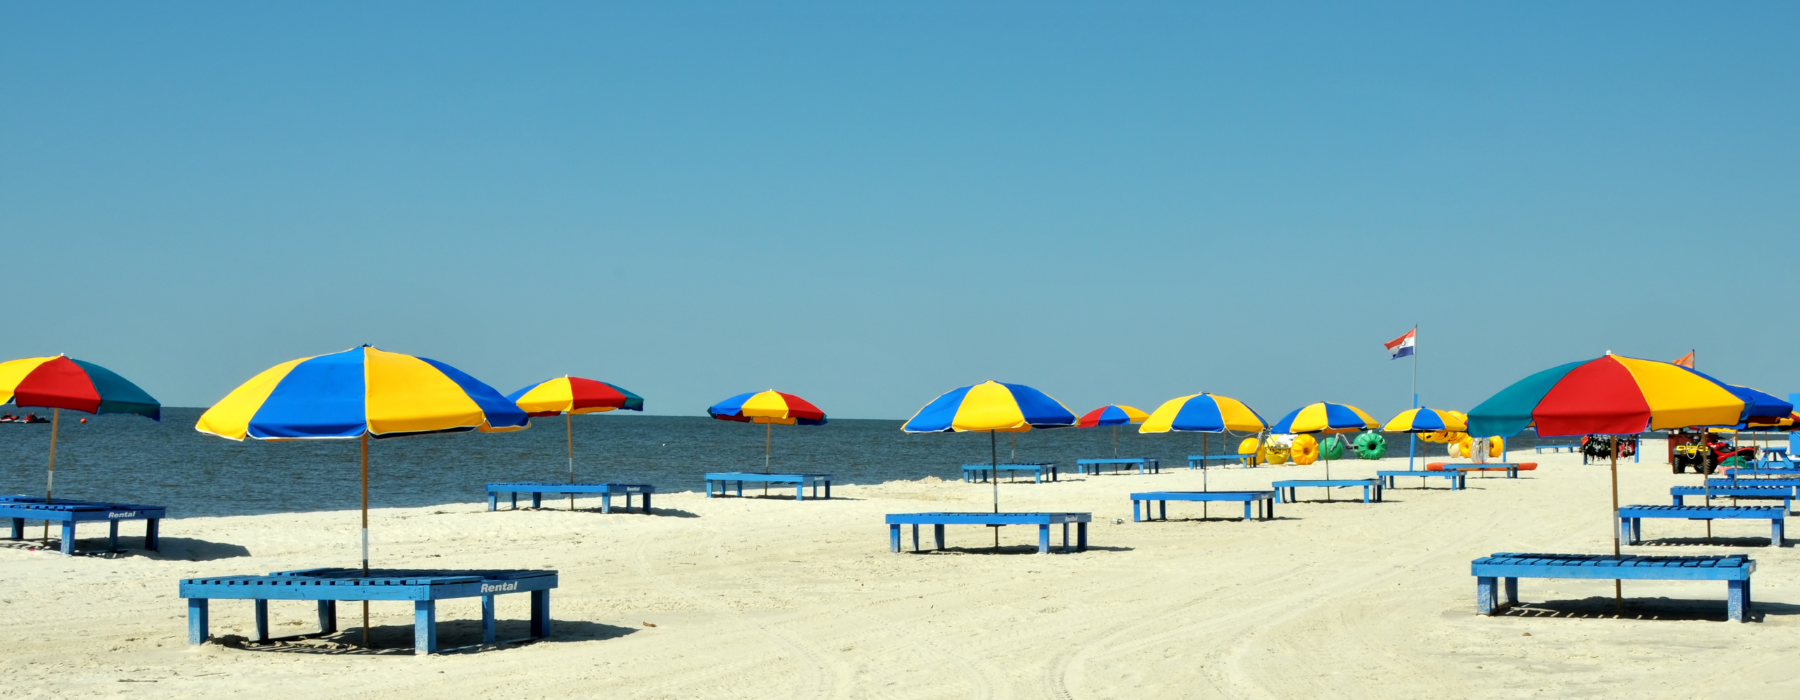 Lounge Chairs and Colorful Umbrellas Biloxi Beach